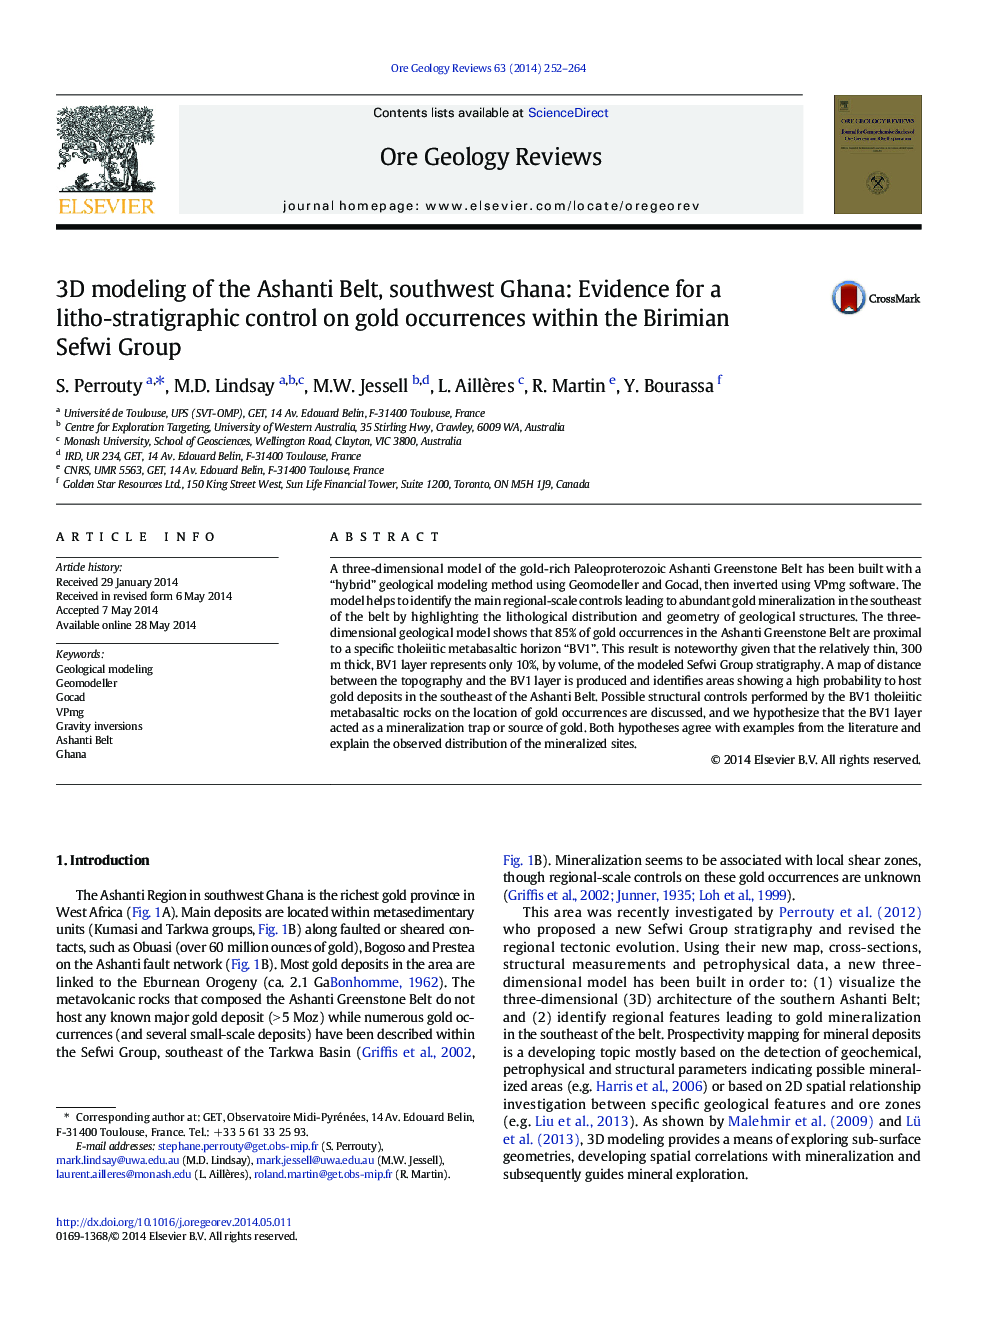 3D modeling of the Ashanti Belt, southwest Ghana: Evidence for a litho-stratigraphic control on gold occurrences within the Birimian Sefwi Group